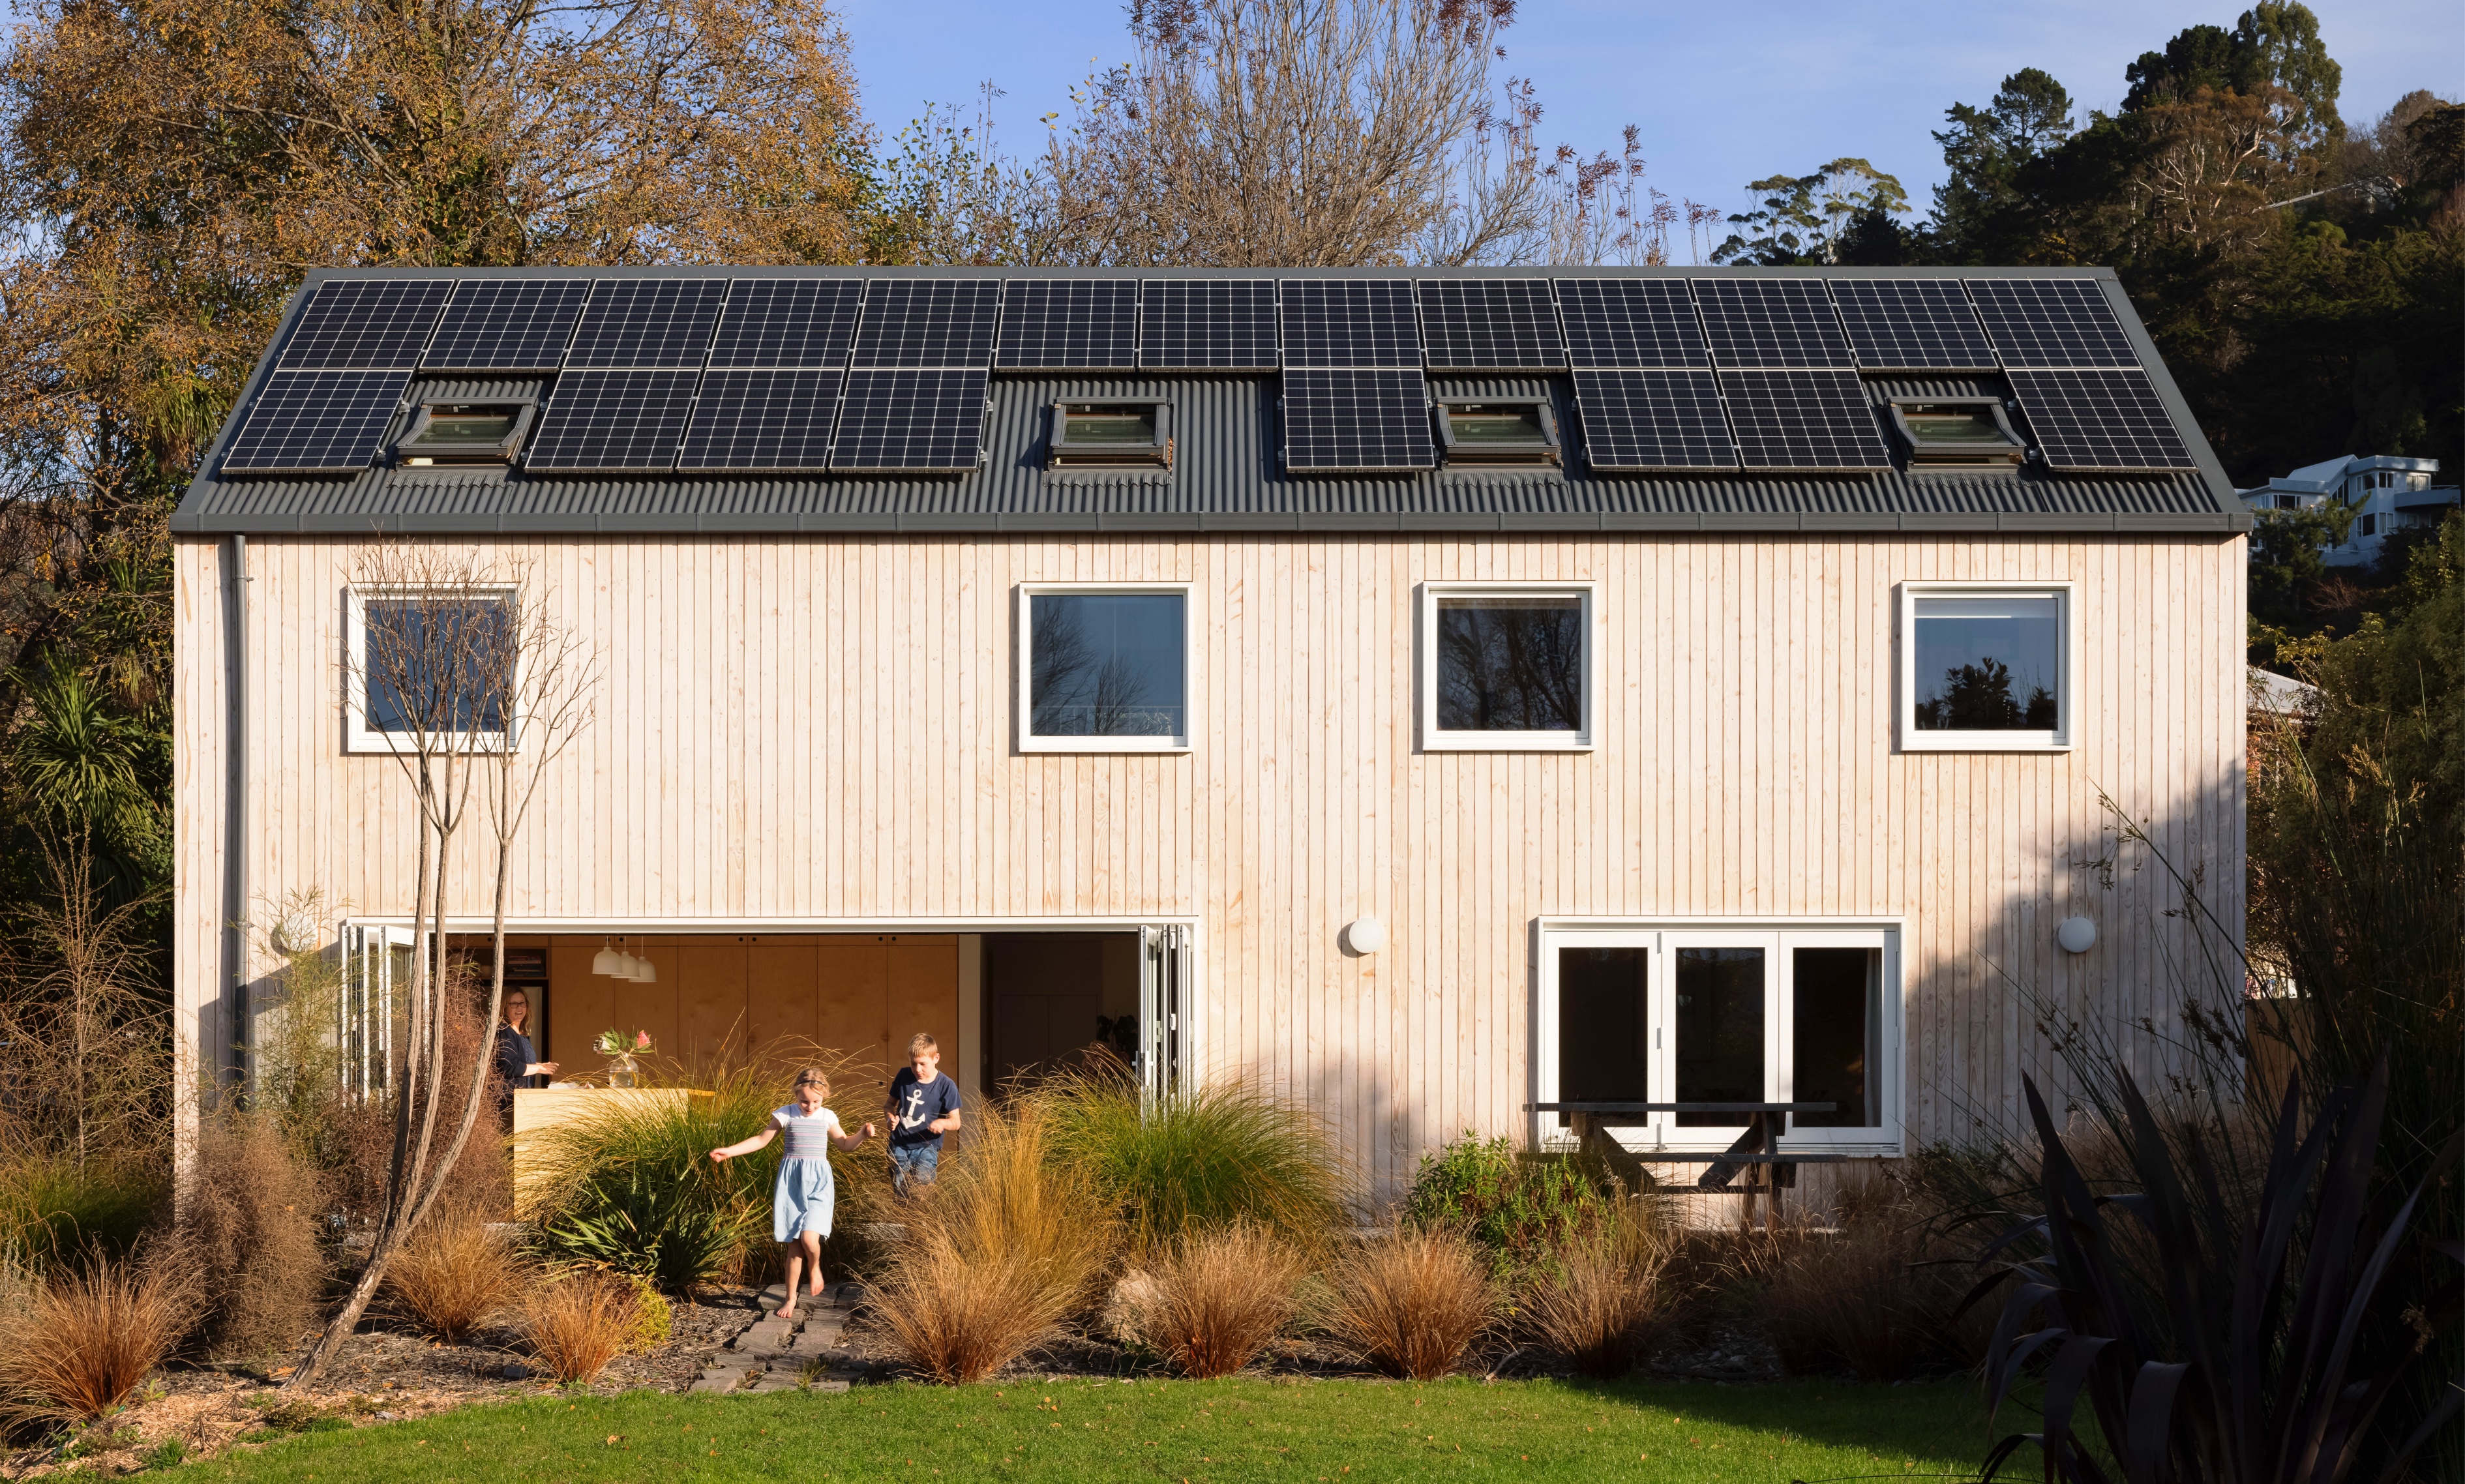 Exterior of house with photovoltaic panels, and children skipping out of open sliding door